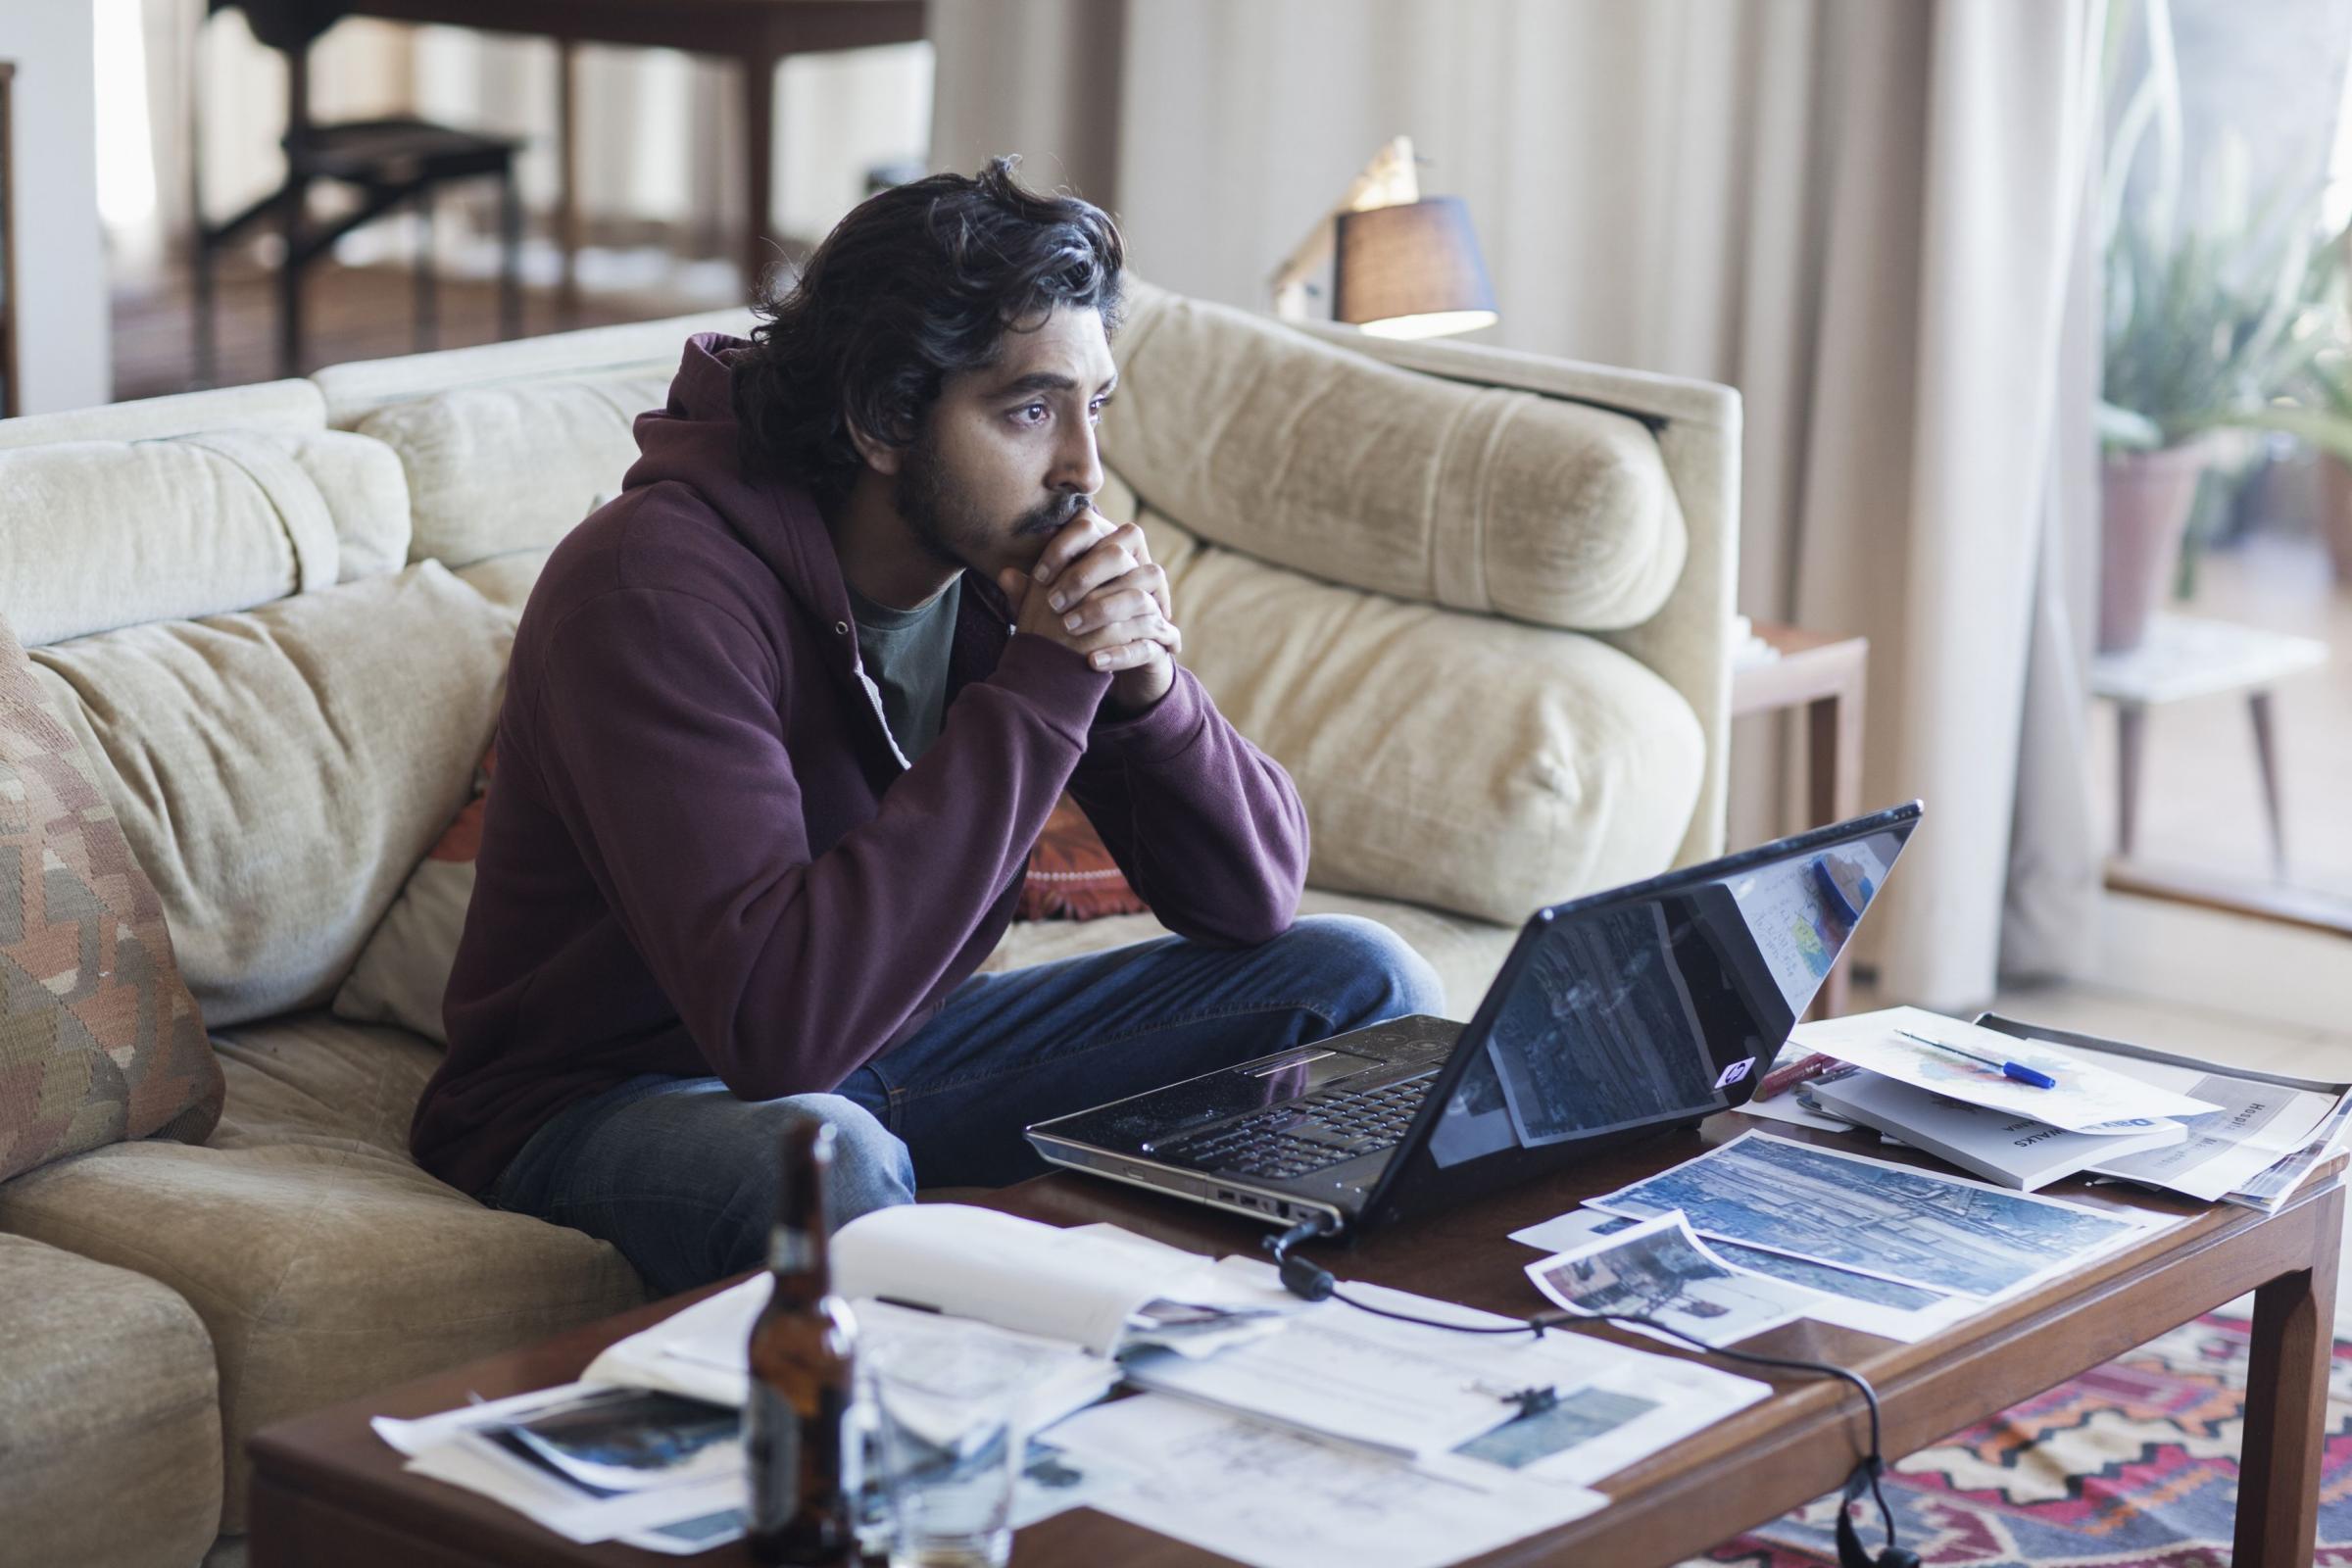 Film review: Life-affirming drama based on true story - Harrow Times